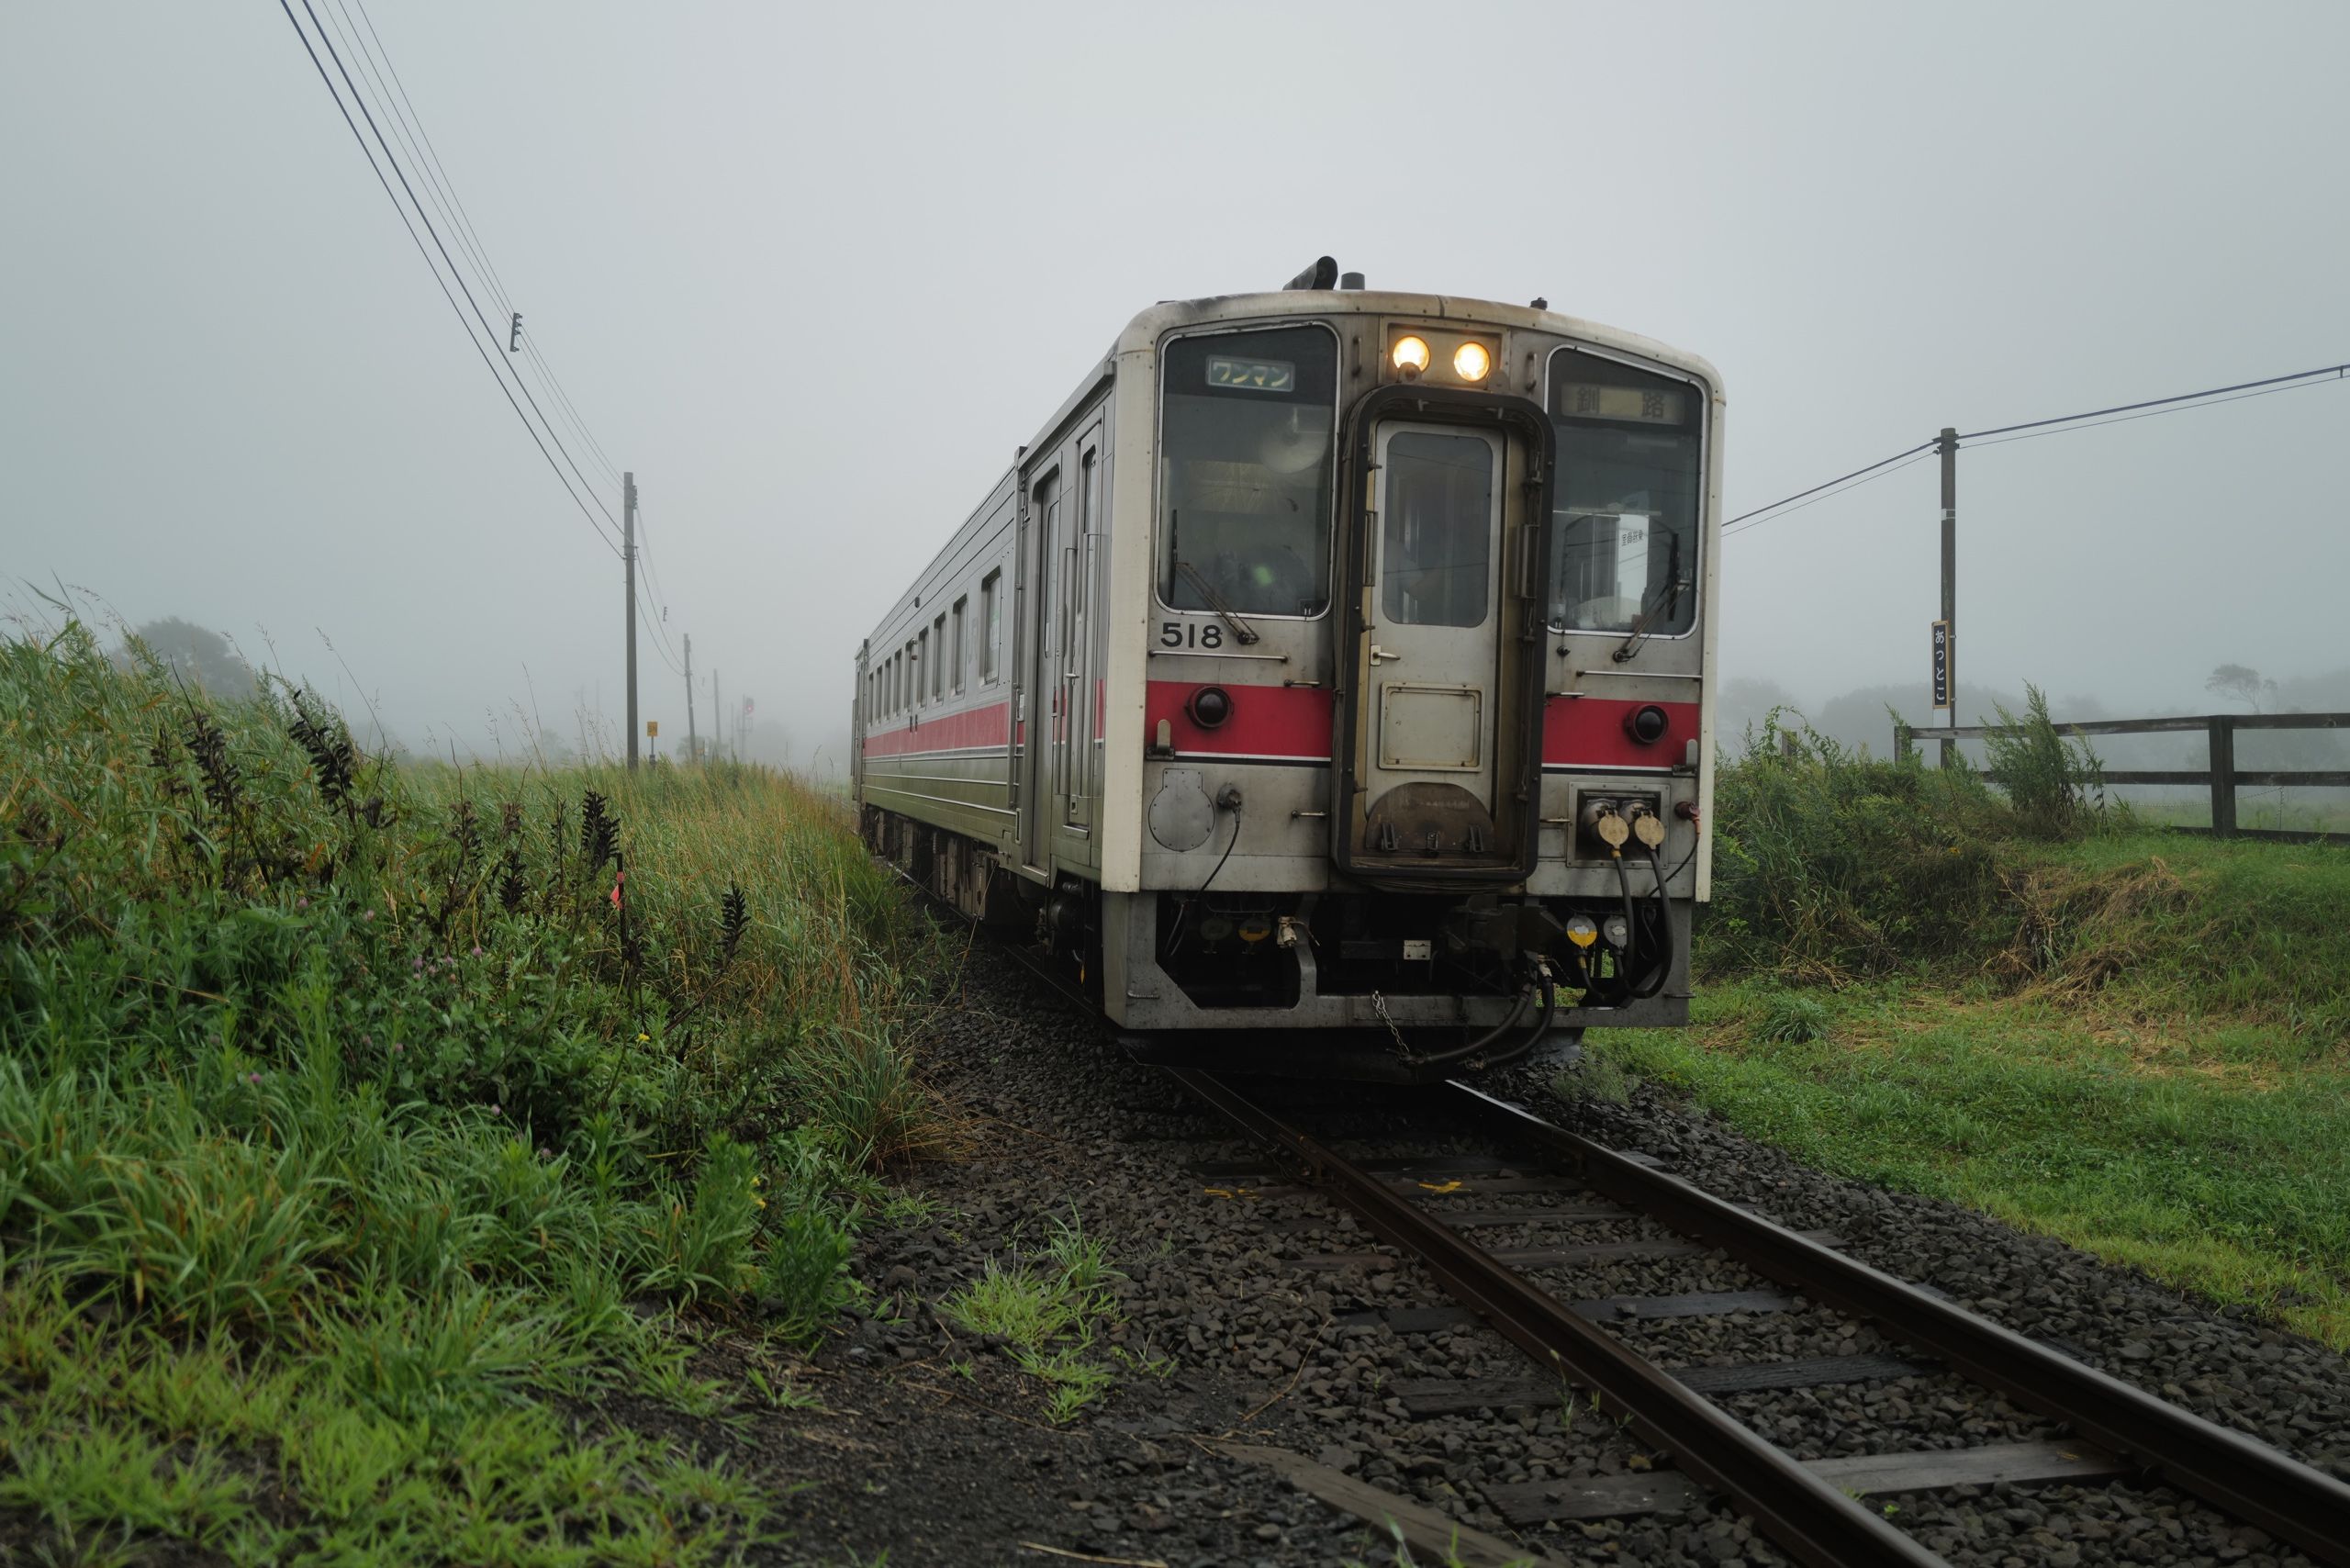 A small train appears from the fog.